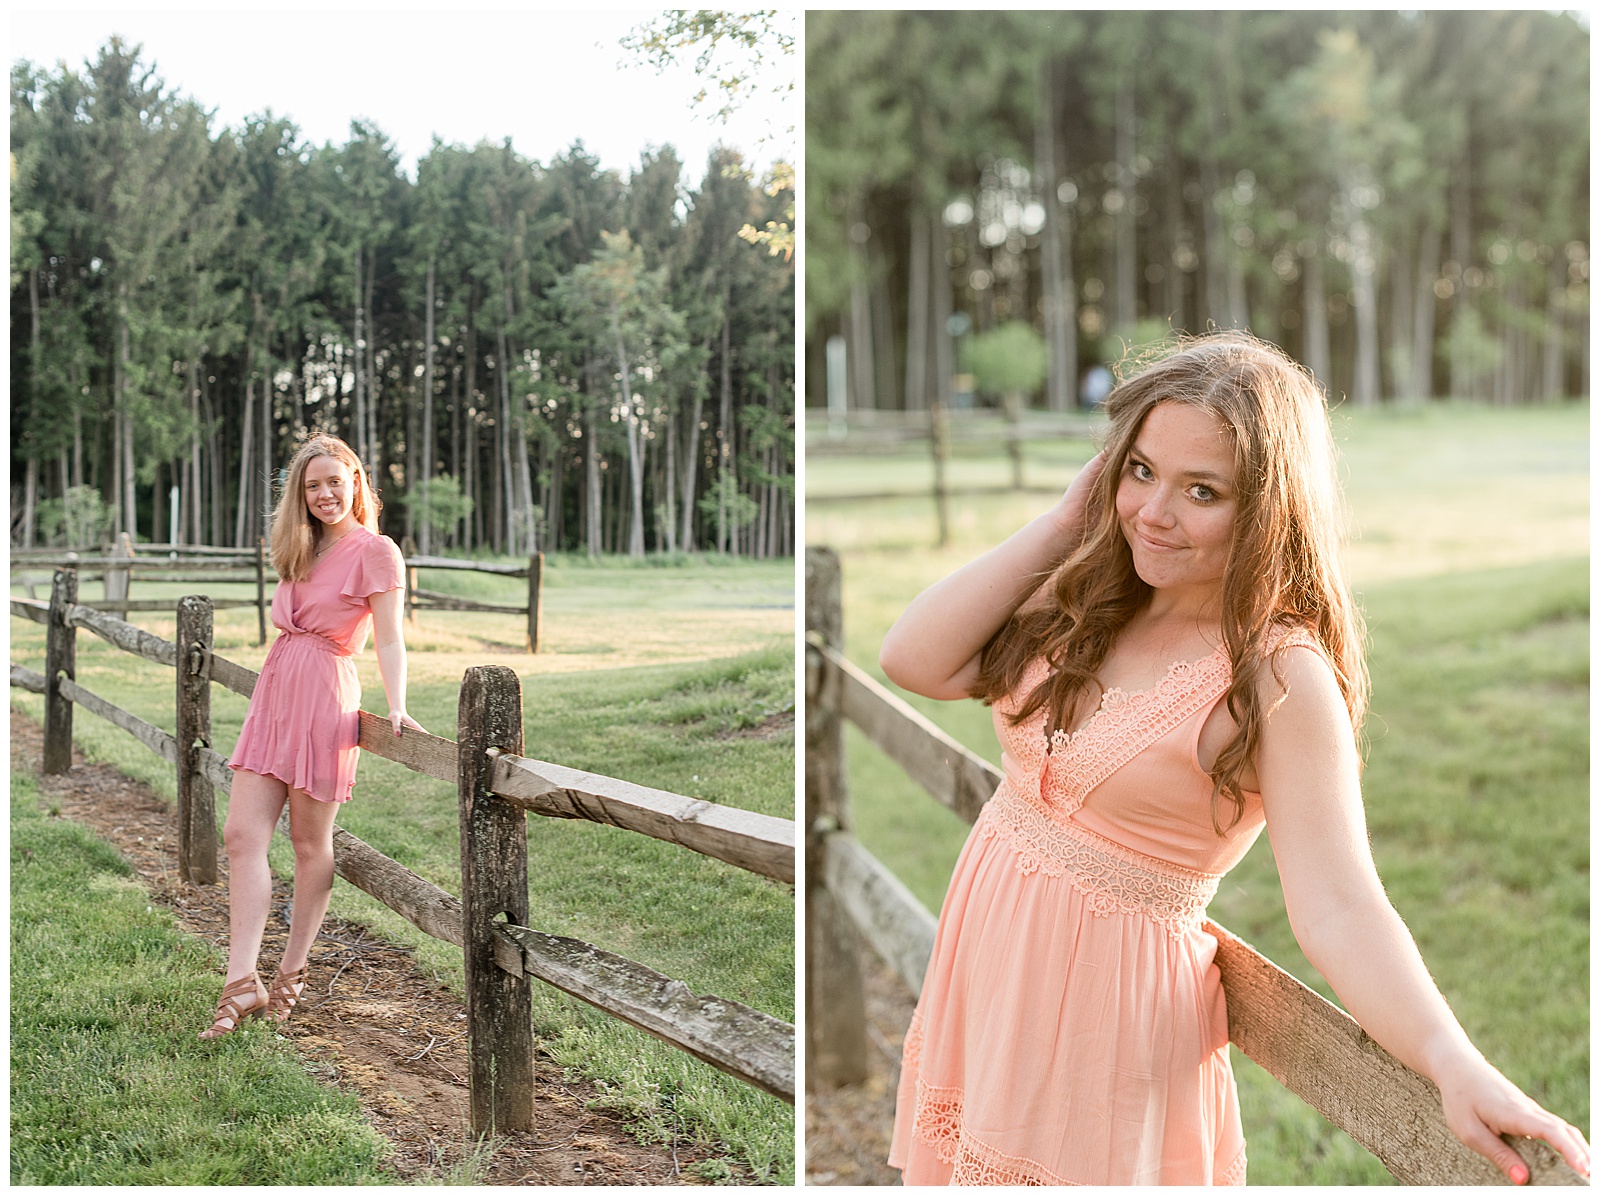 senior girls leaning against wooden fence in pink and peach dresses and smiling at park 